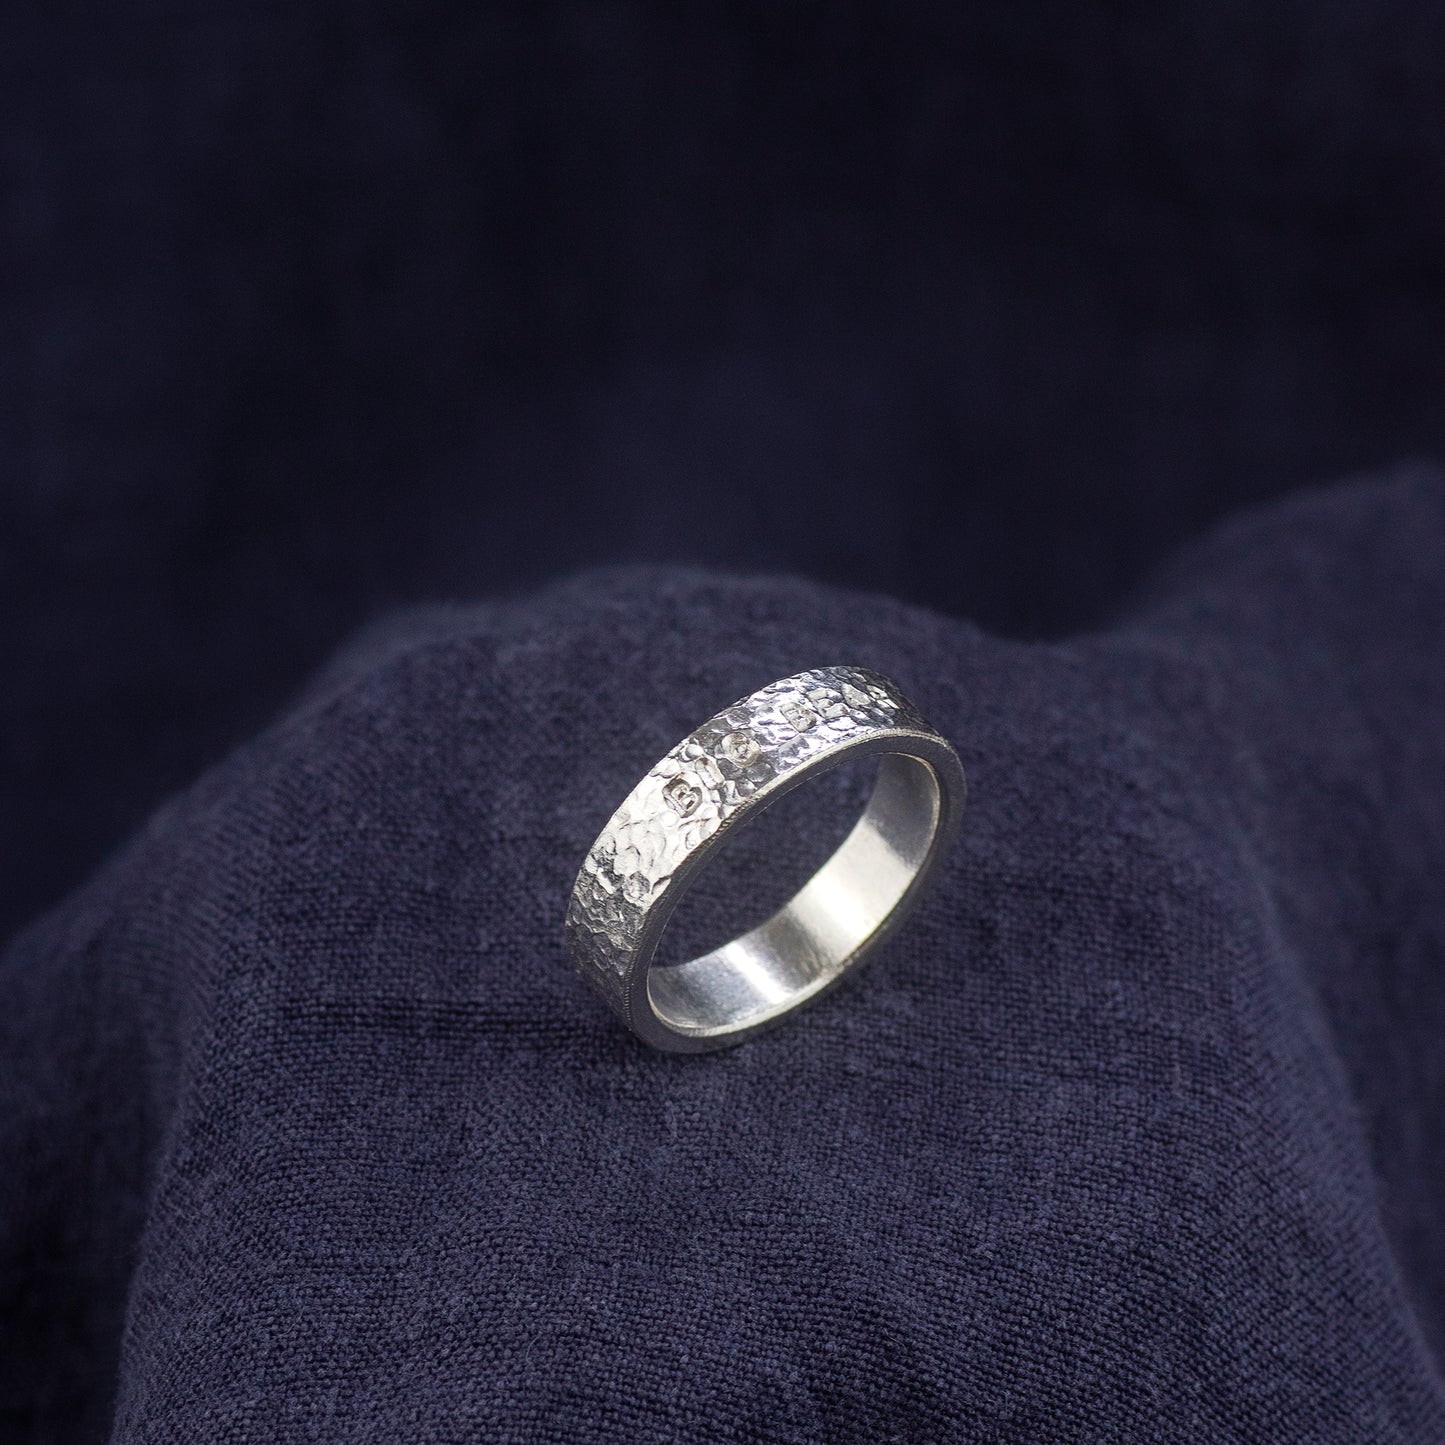 Men's Personalised Textured Ring - Hand-stamped